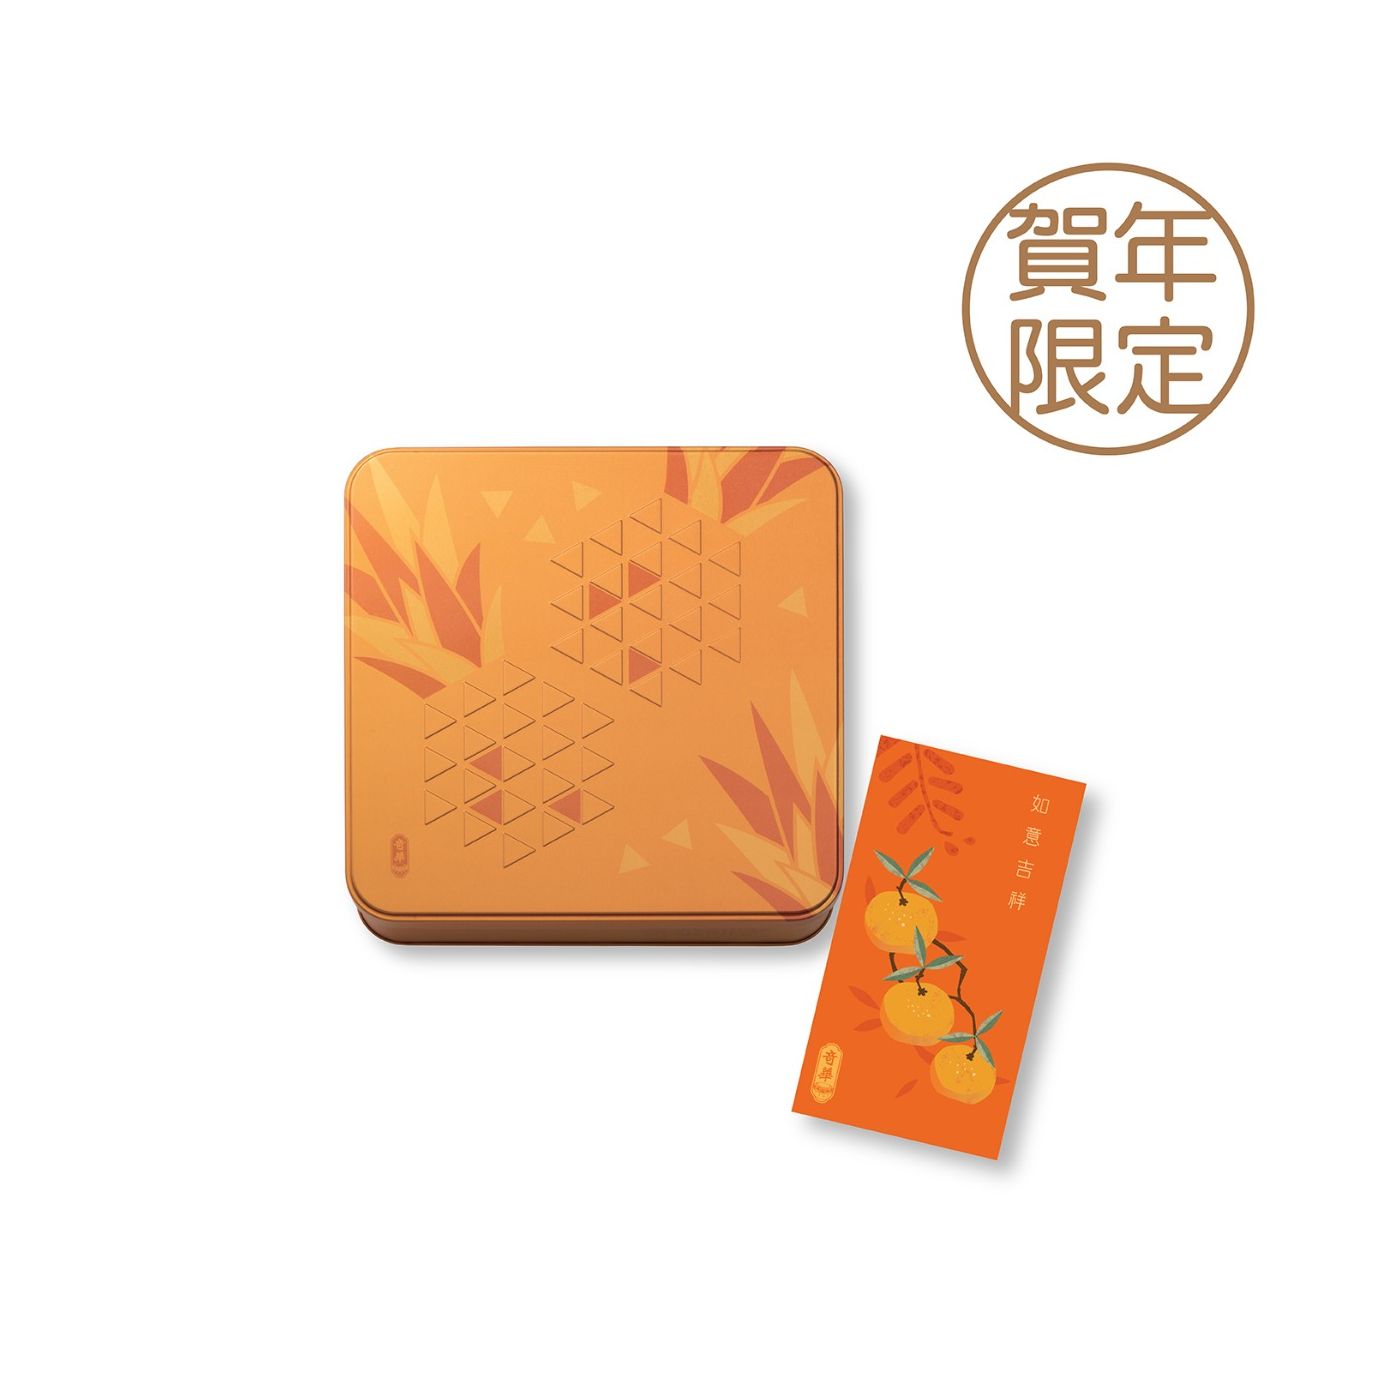 [JLL Offer] Kee Wah | Chinese New Year Pineapple Shortcake Gift Box (Physical Coupon)